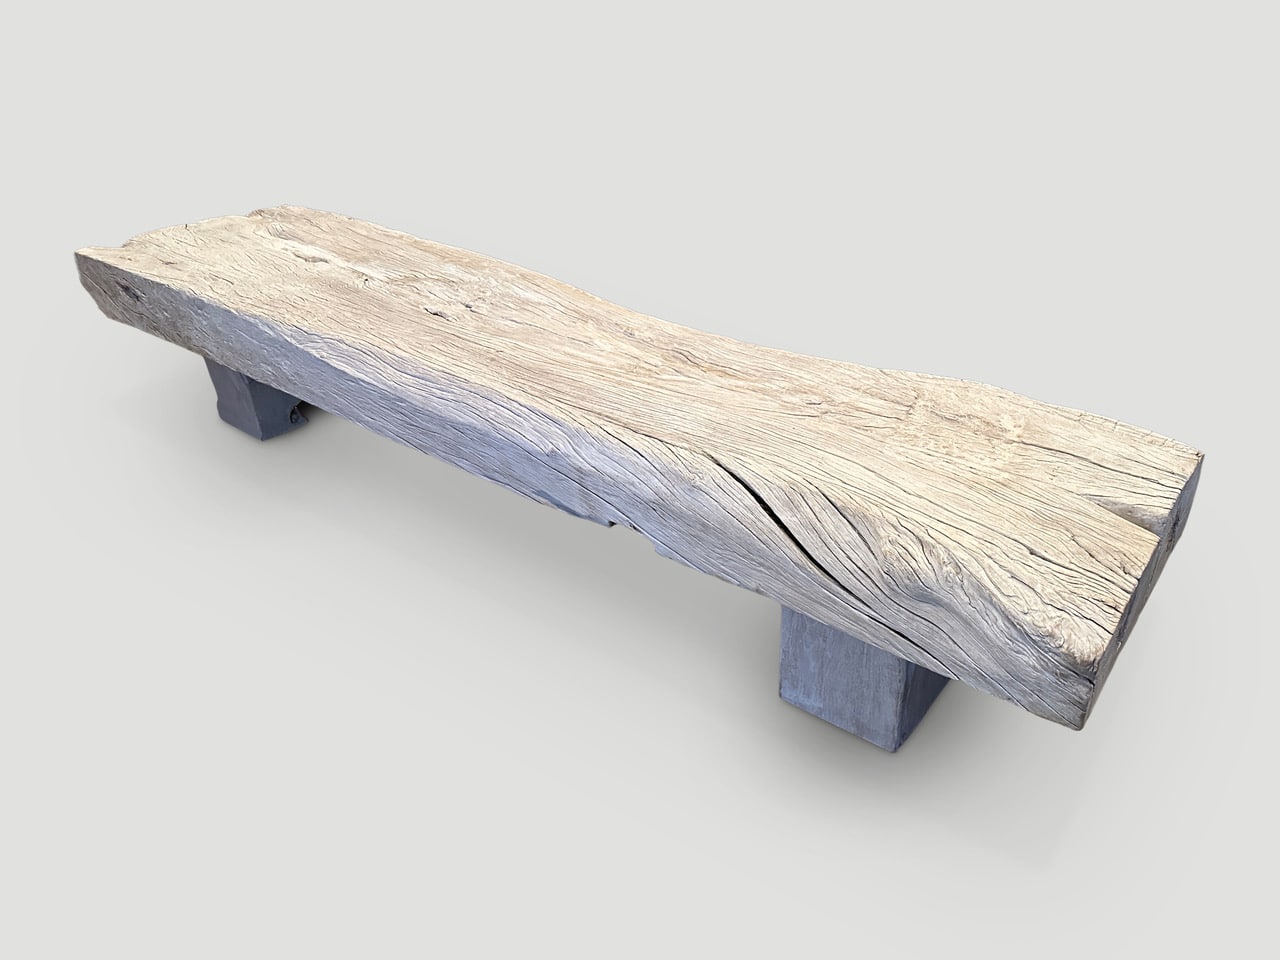 teak log style bench or coffee table